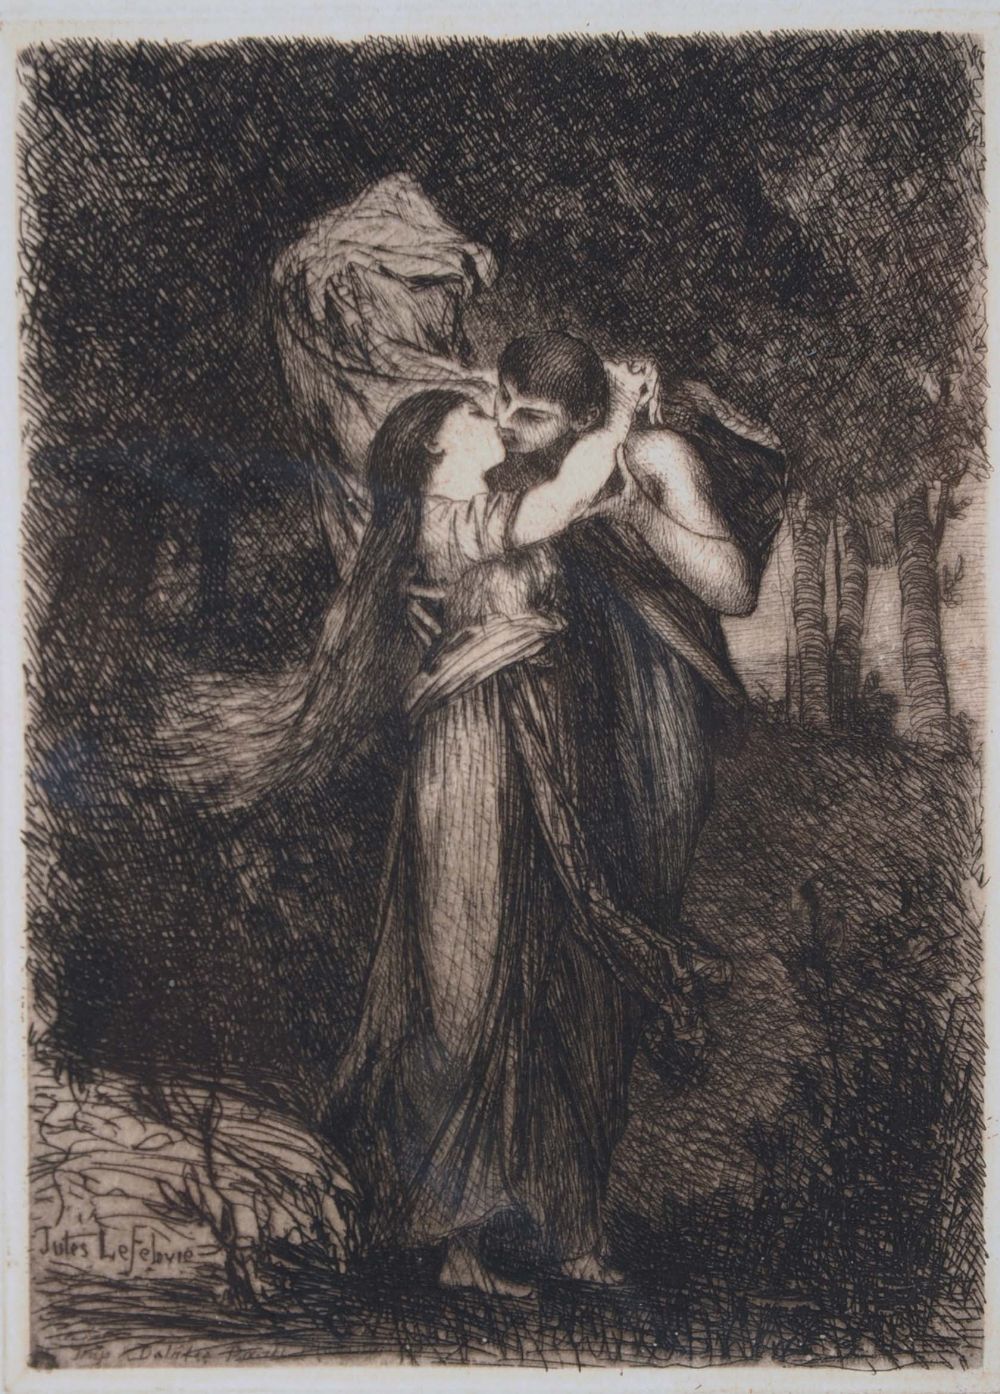 *JULES LEFEBVRE (1836-1911) 'Lovers', etching, 15.5 x 11.5cm